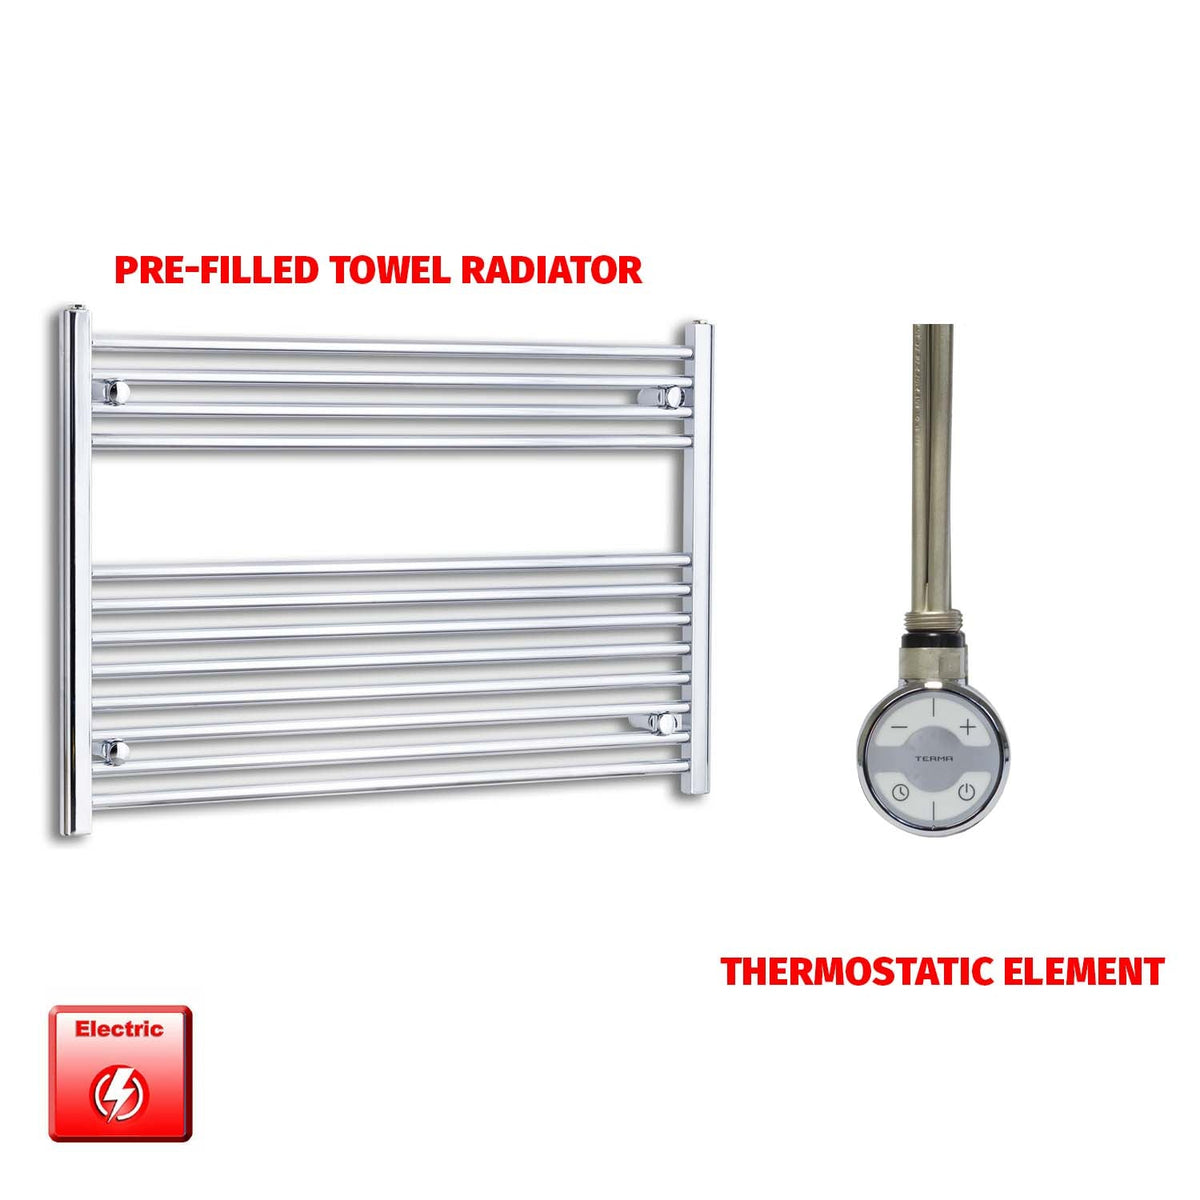 700 x 1000 Pre-Filled Electric Heated Towel Radiator Straight Chrome MOA Thermostatic element no timer